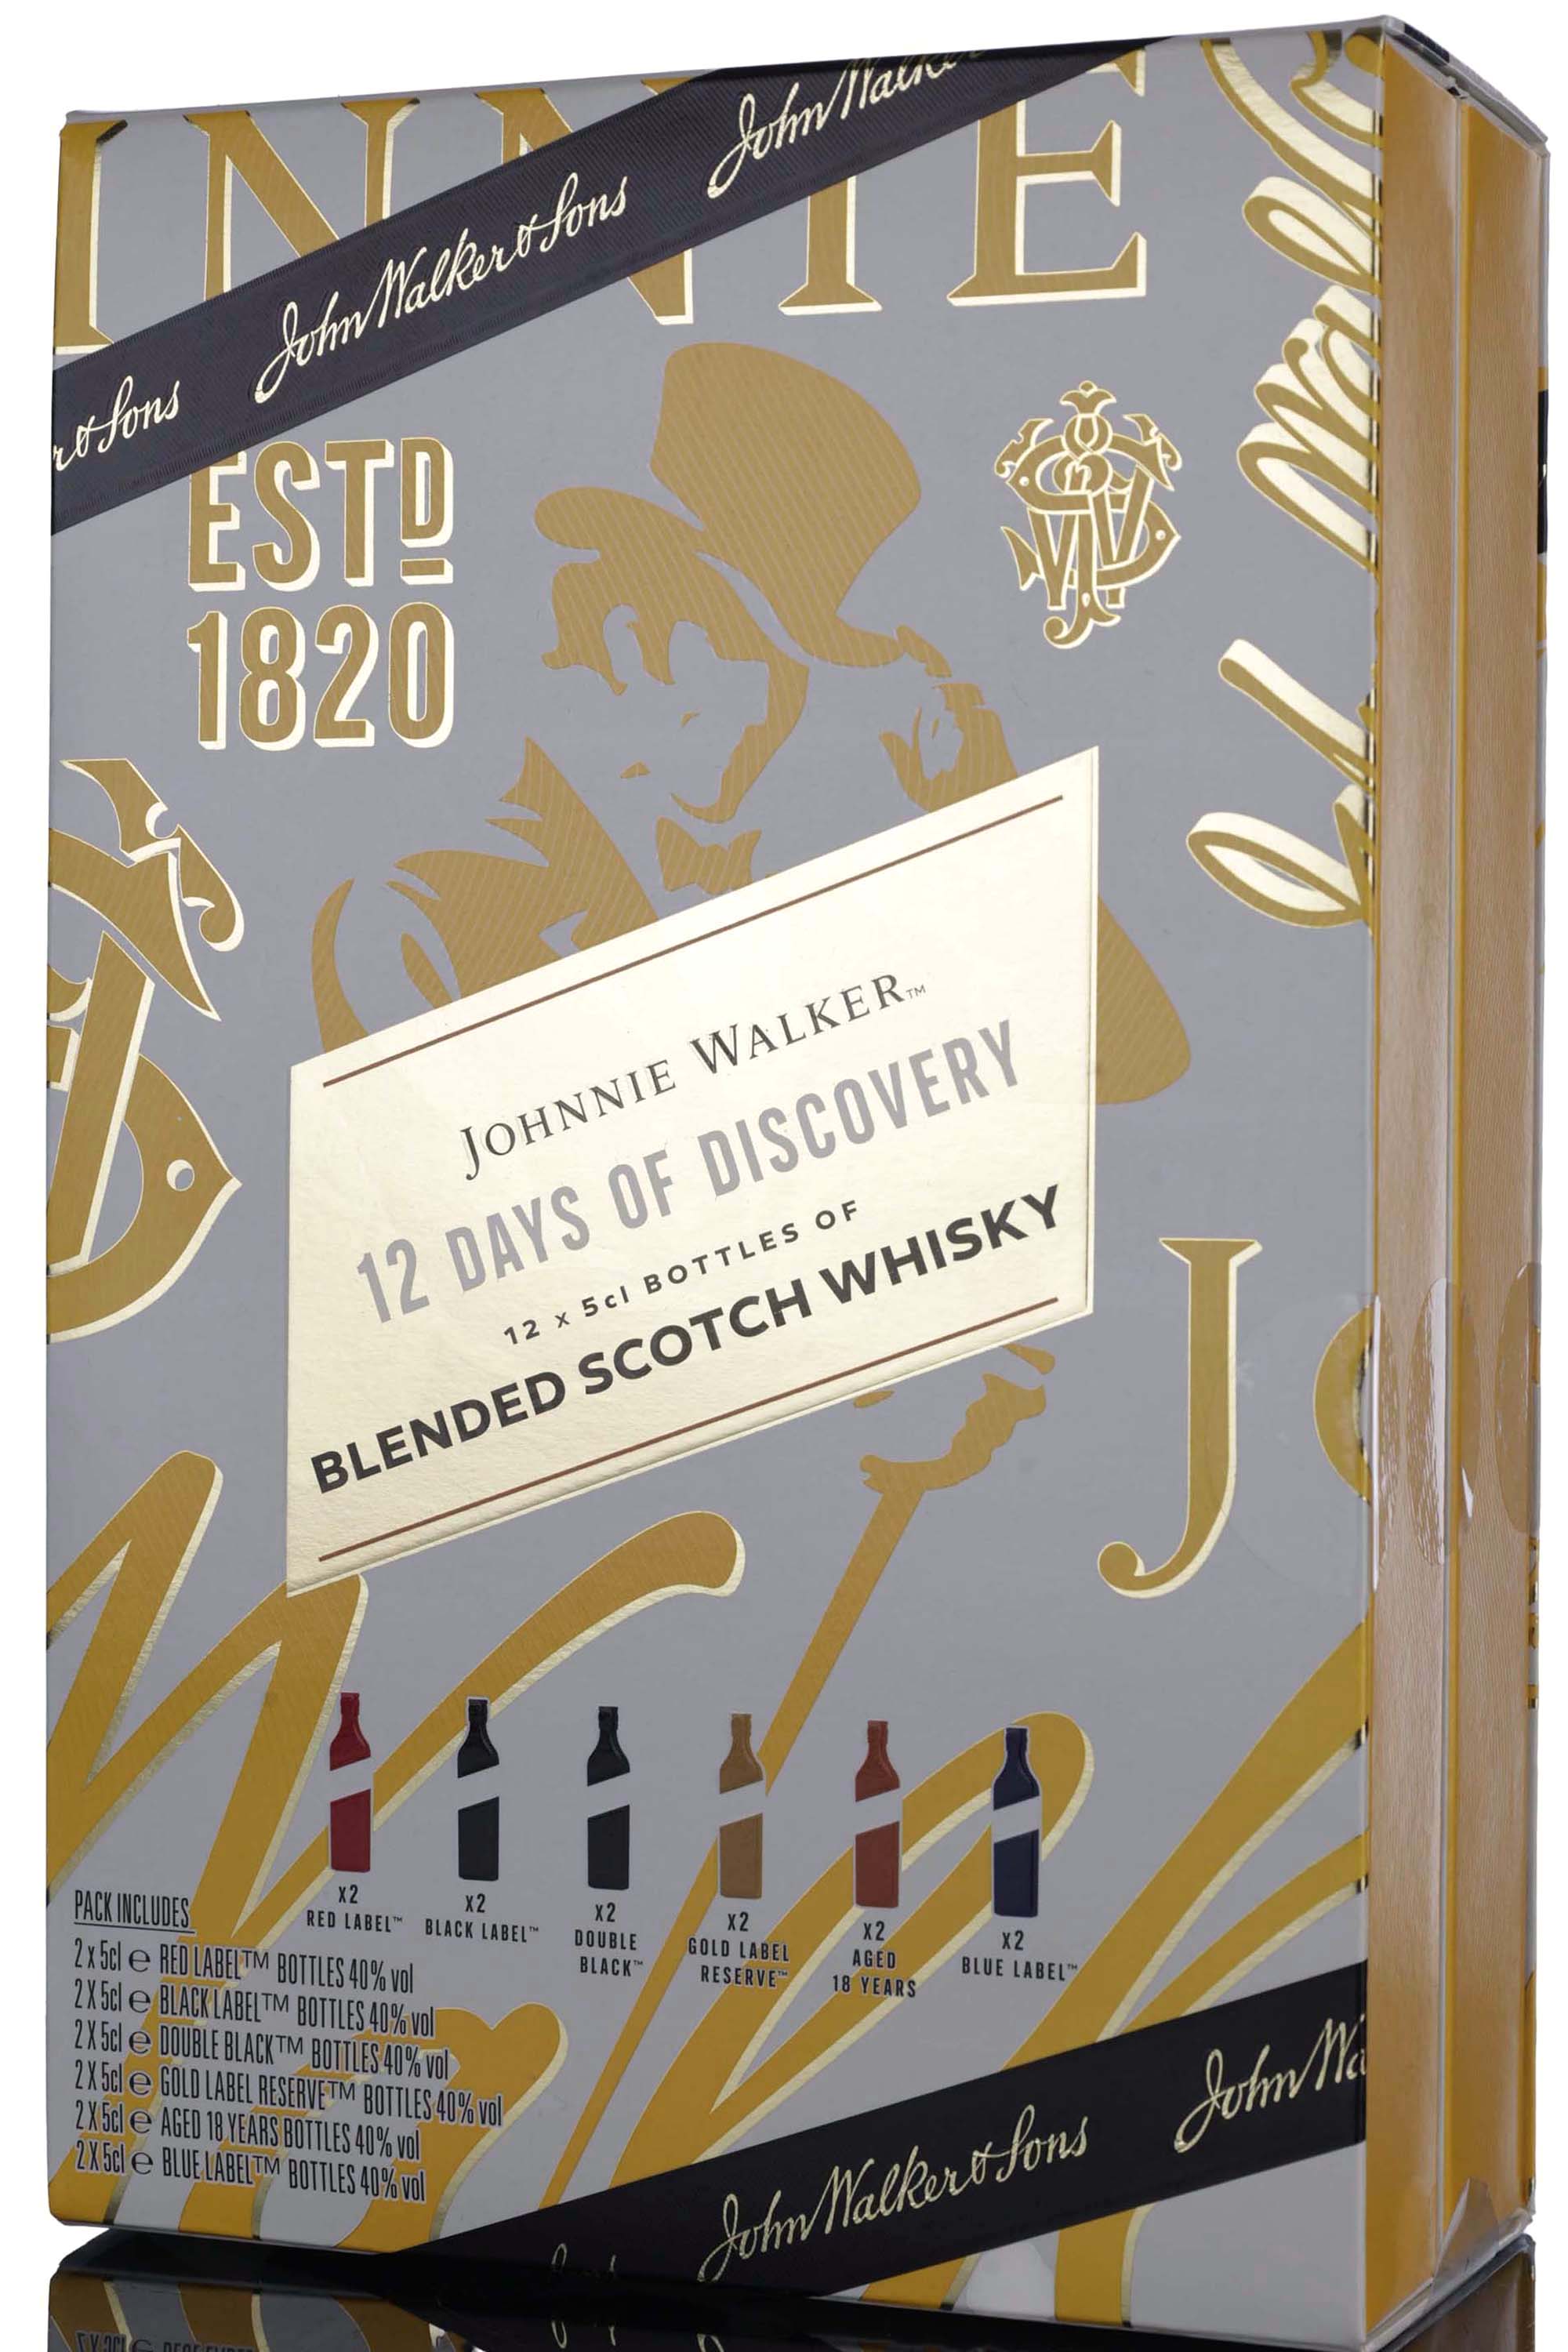 Johnnie Walker 12 Days Of Discovery Miniature Set